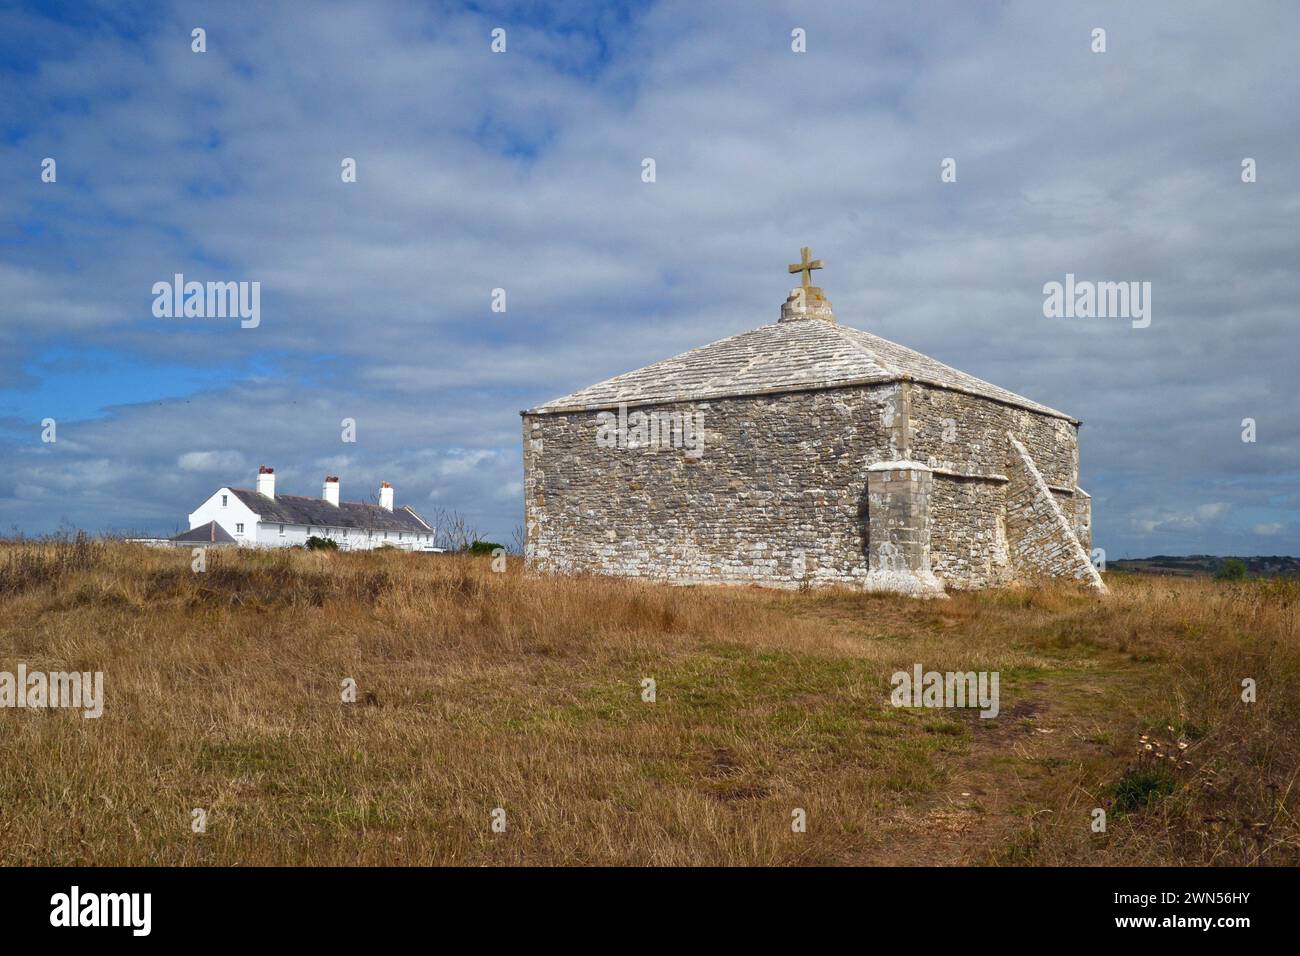 St Aldhelm's Chapel (also known as St Alban's Chapel) at St Aldhelm's Head, Worth Matravers, Swanage, Isle of Purbeck, Dorset, UK Stock Photo